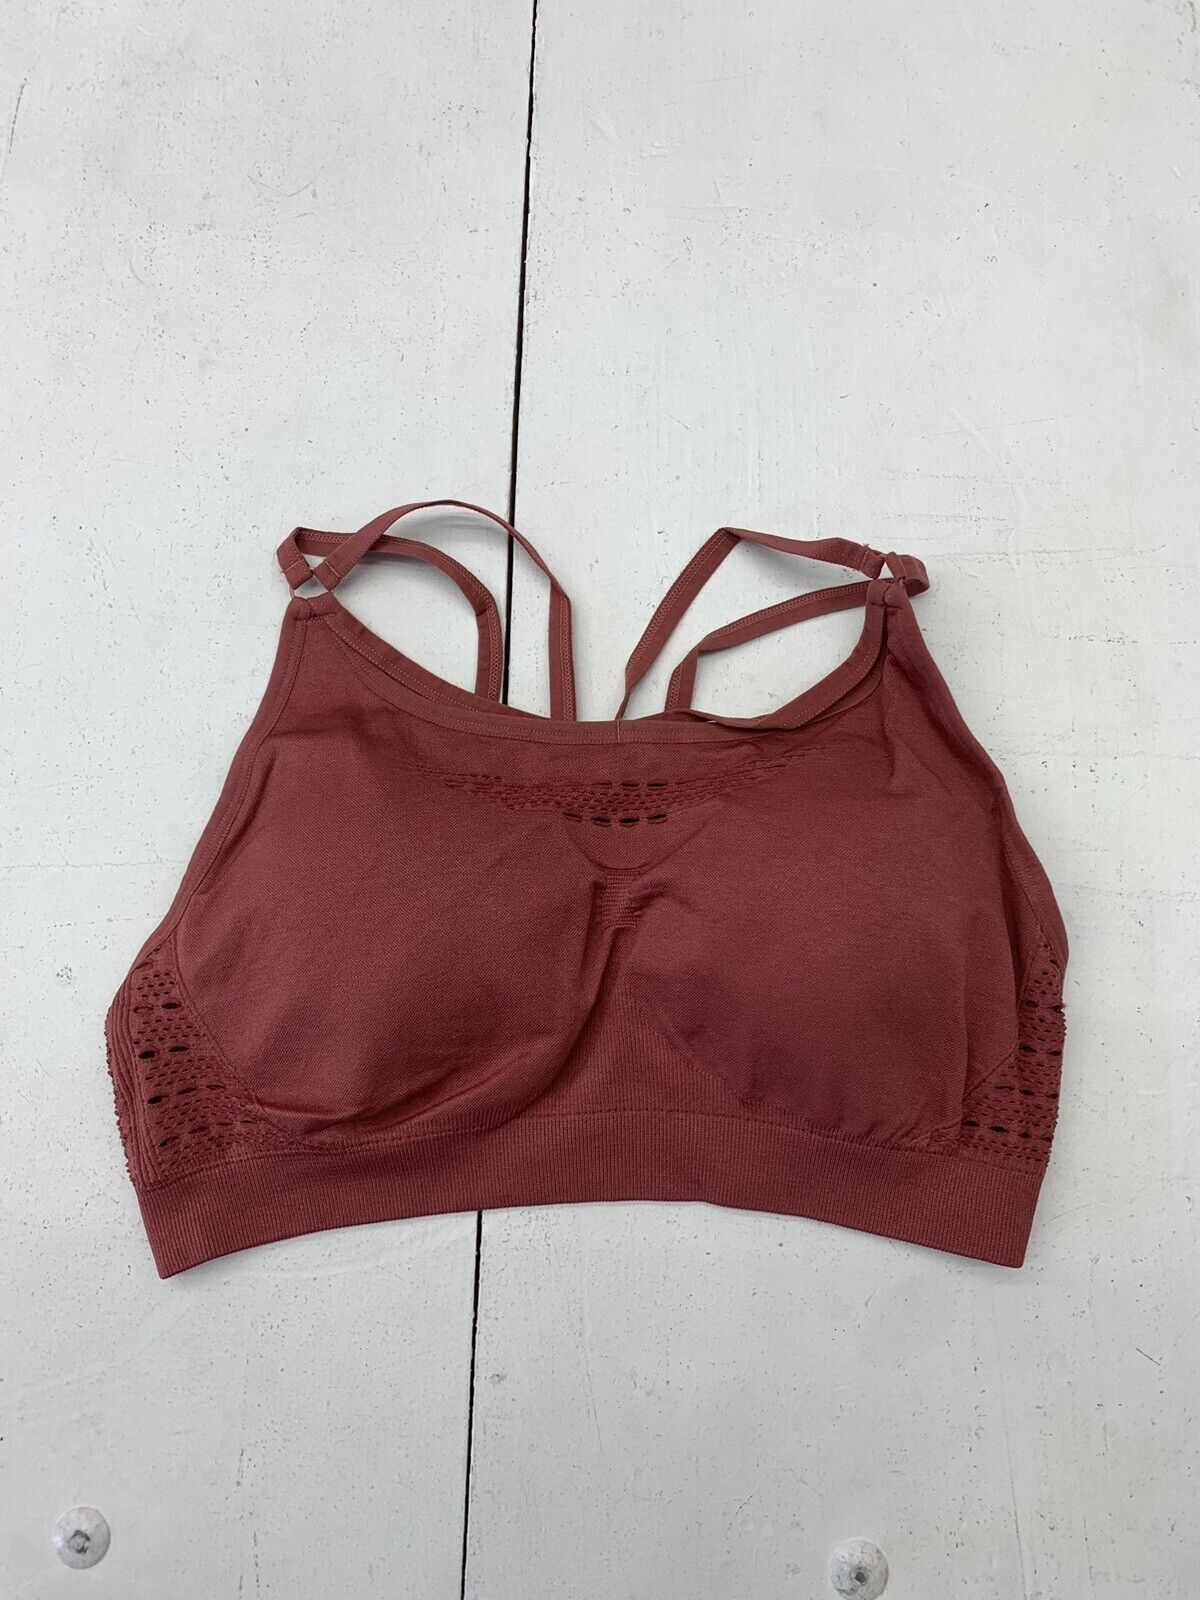 Unbranded Womens Red Athletic Sports Bra Size XL